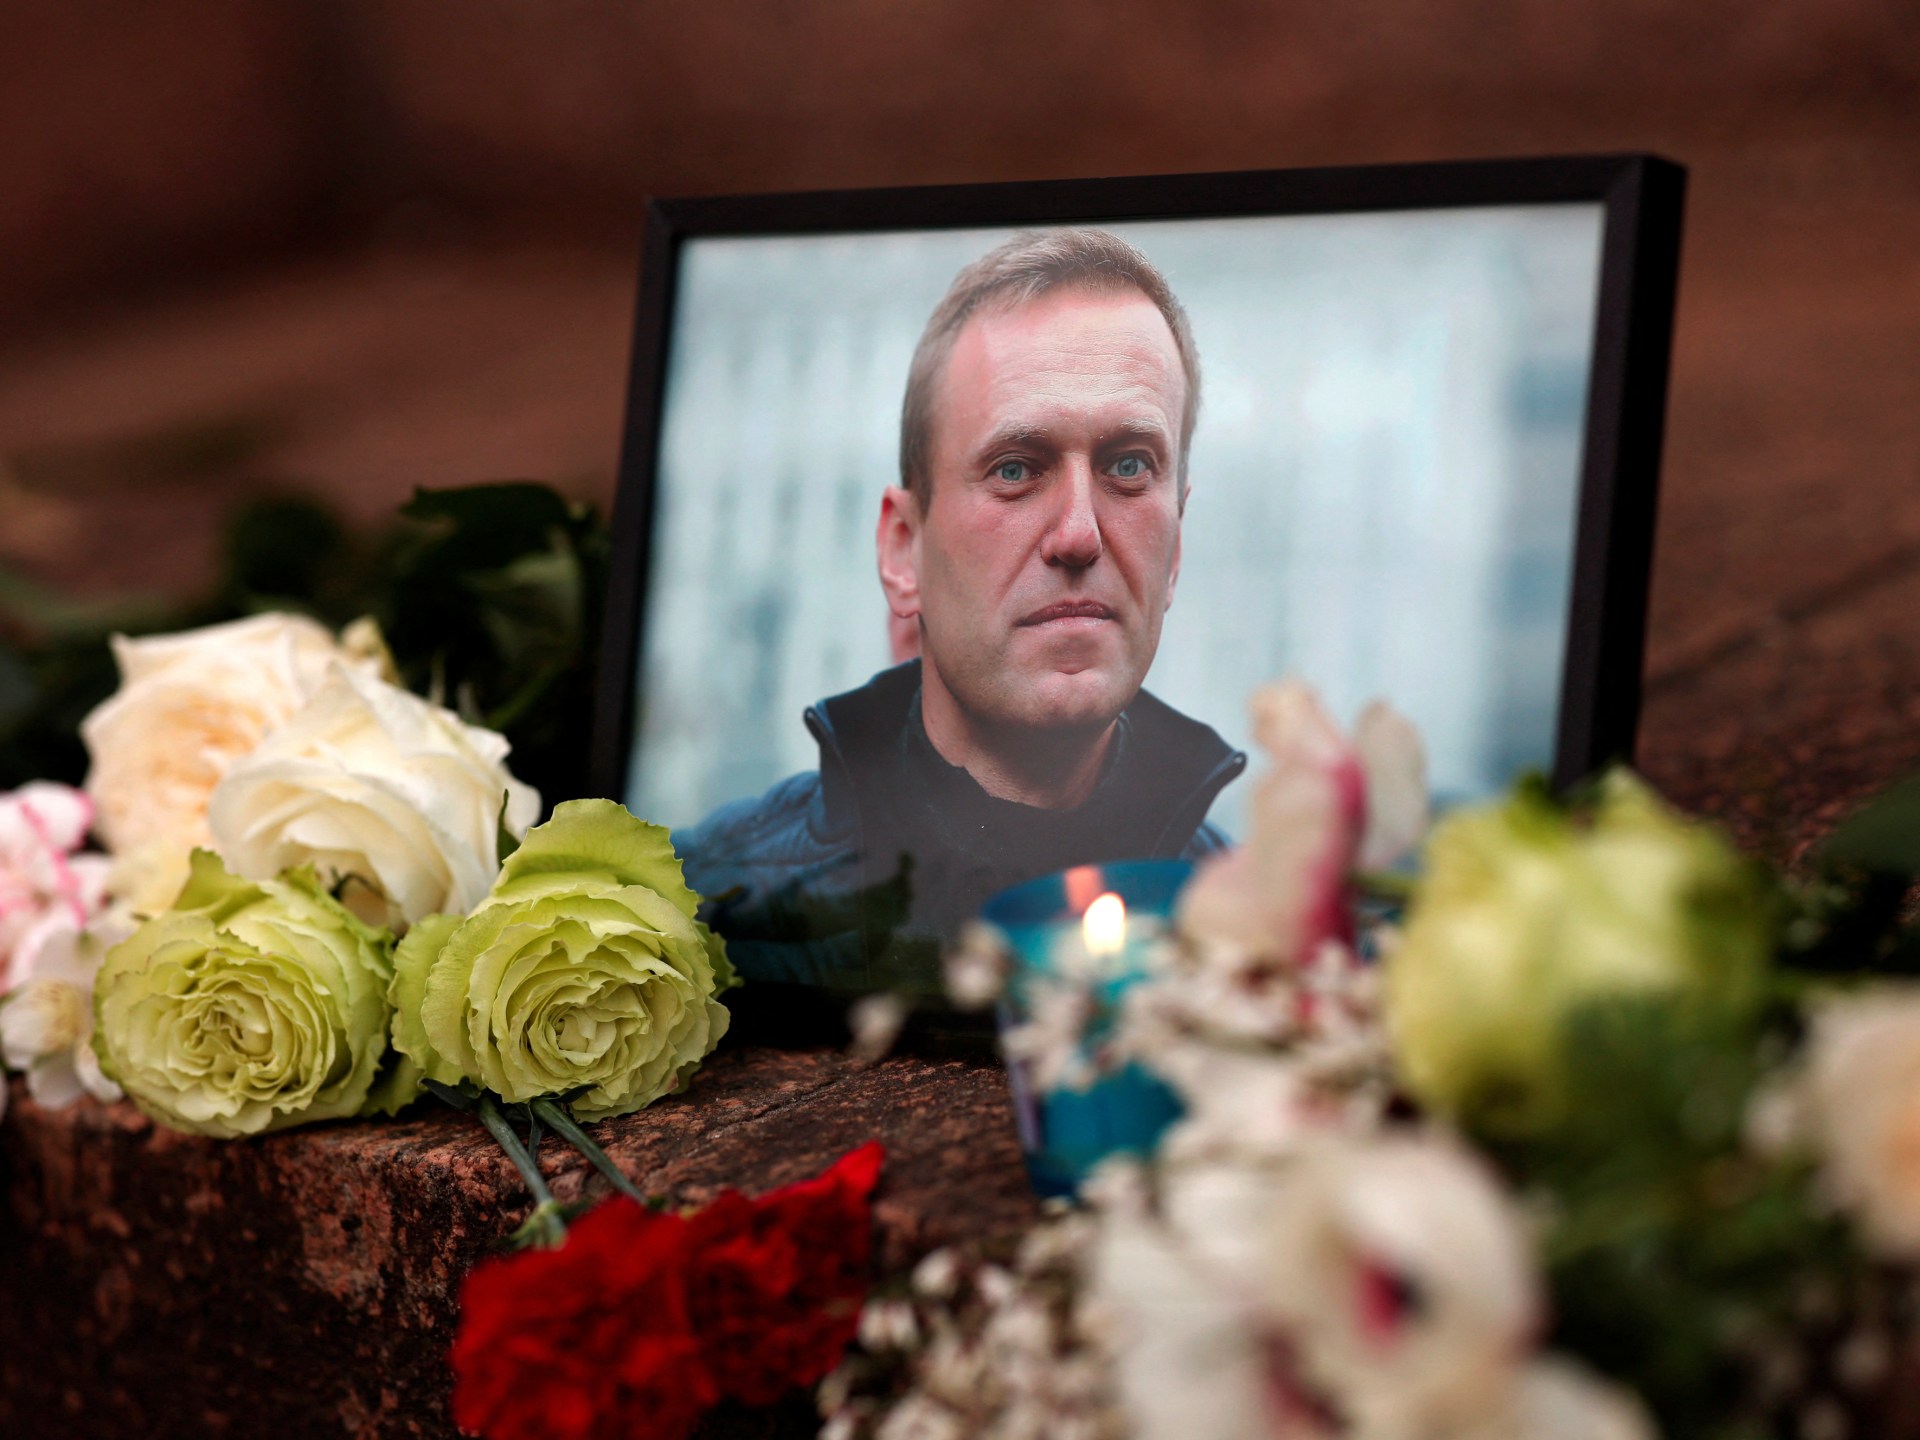 Hard void to fill: Navalny’s death poses challenges for Russian opposition